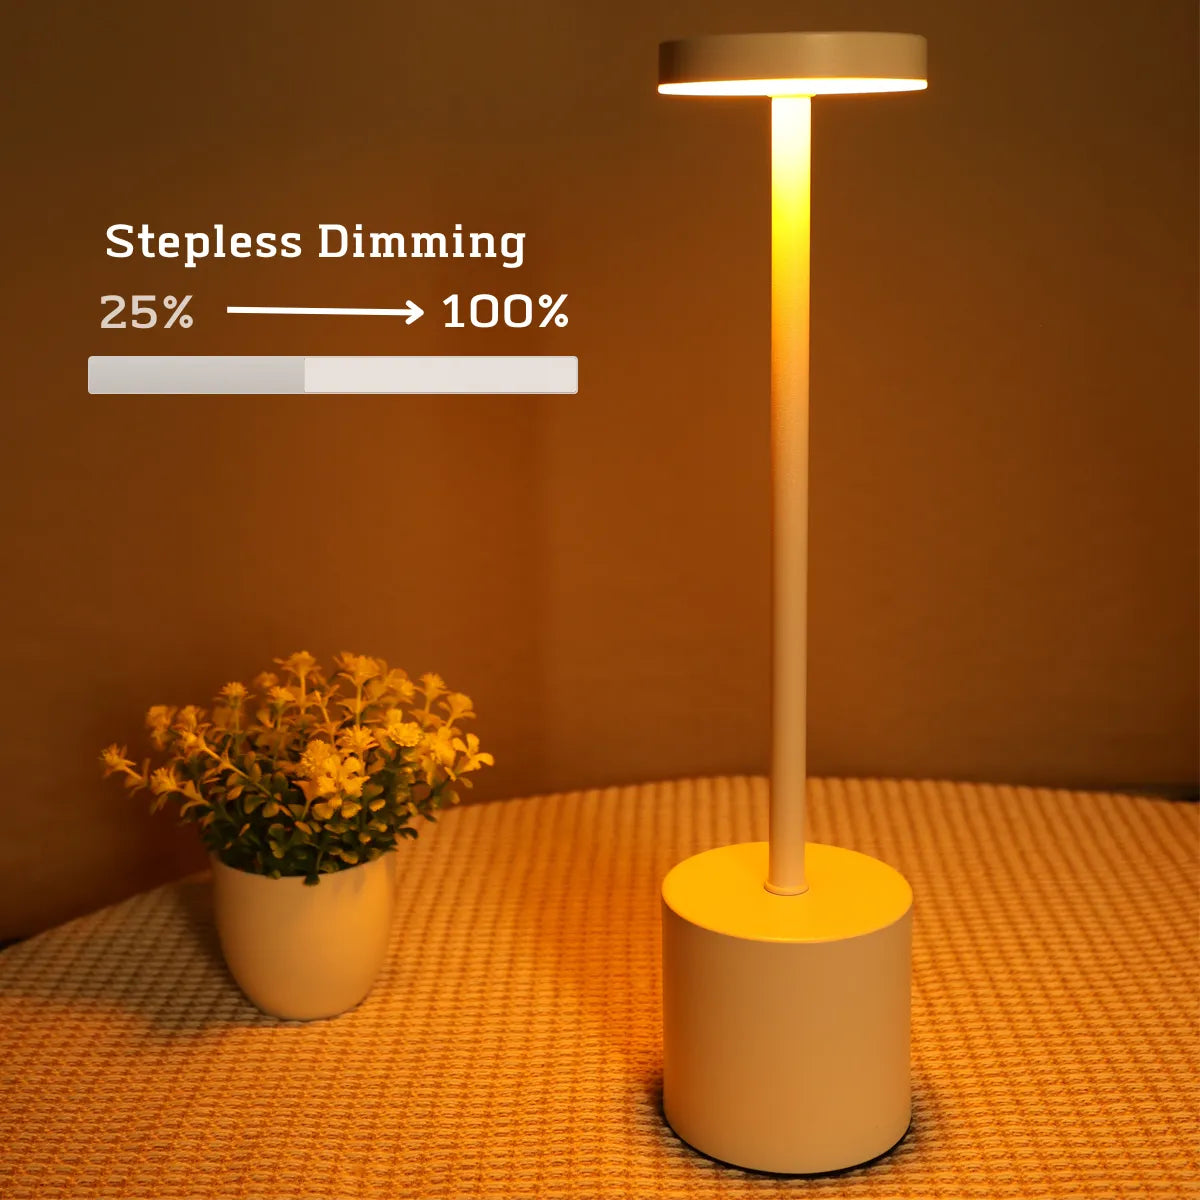 Rechargeable Touch Metal Table Lamp: Versatile Lighting for Any Space